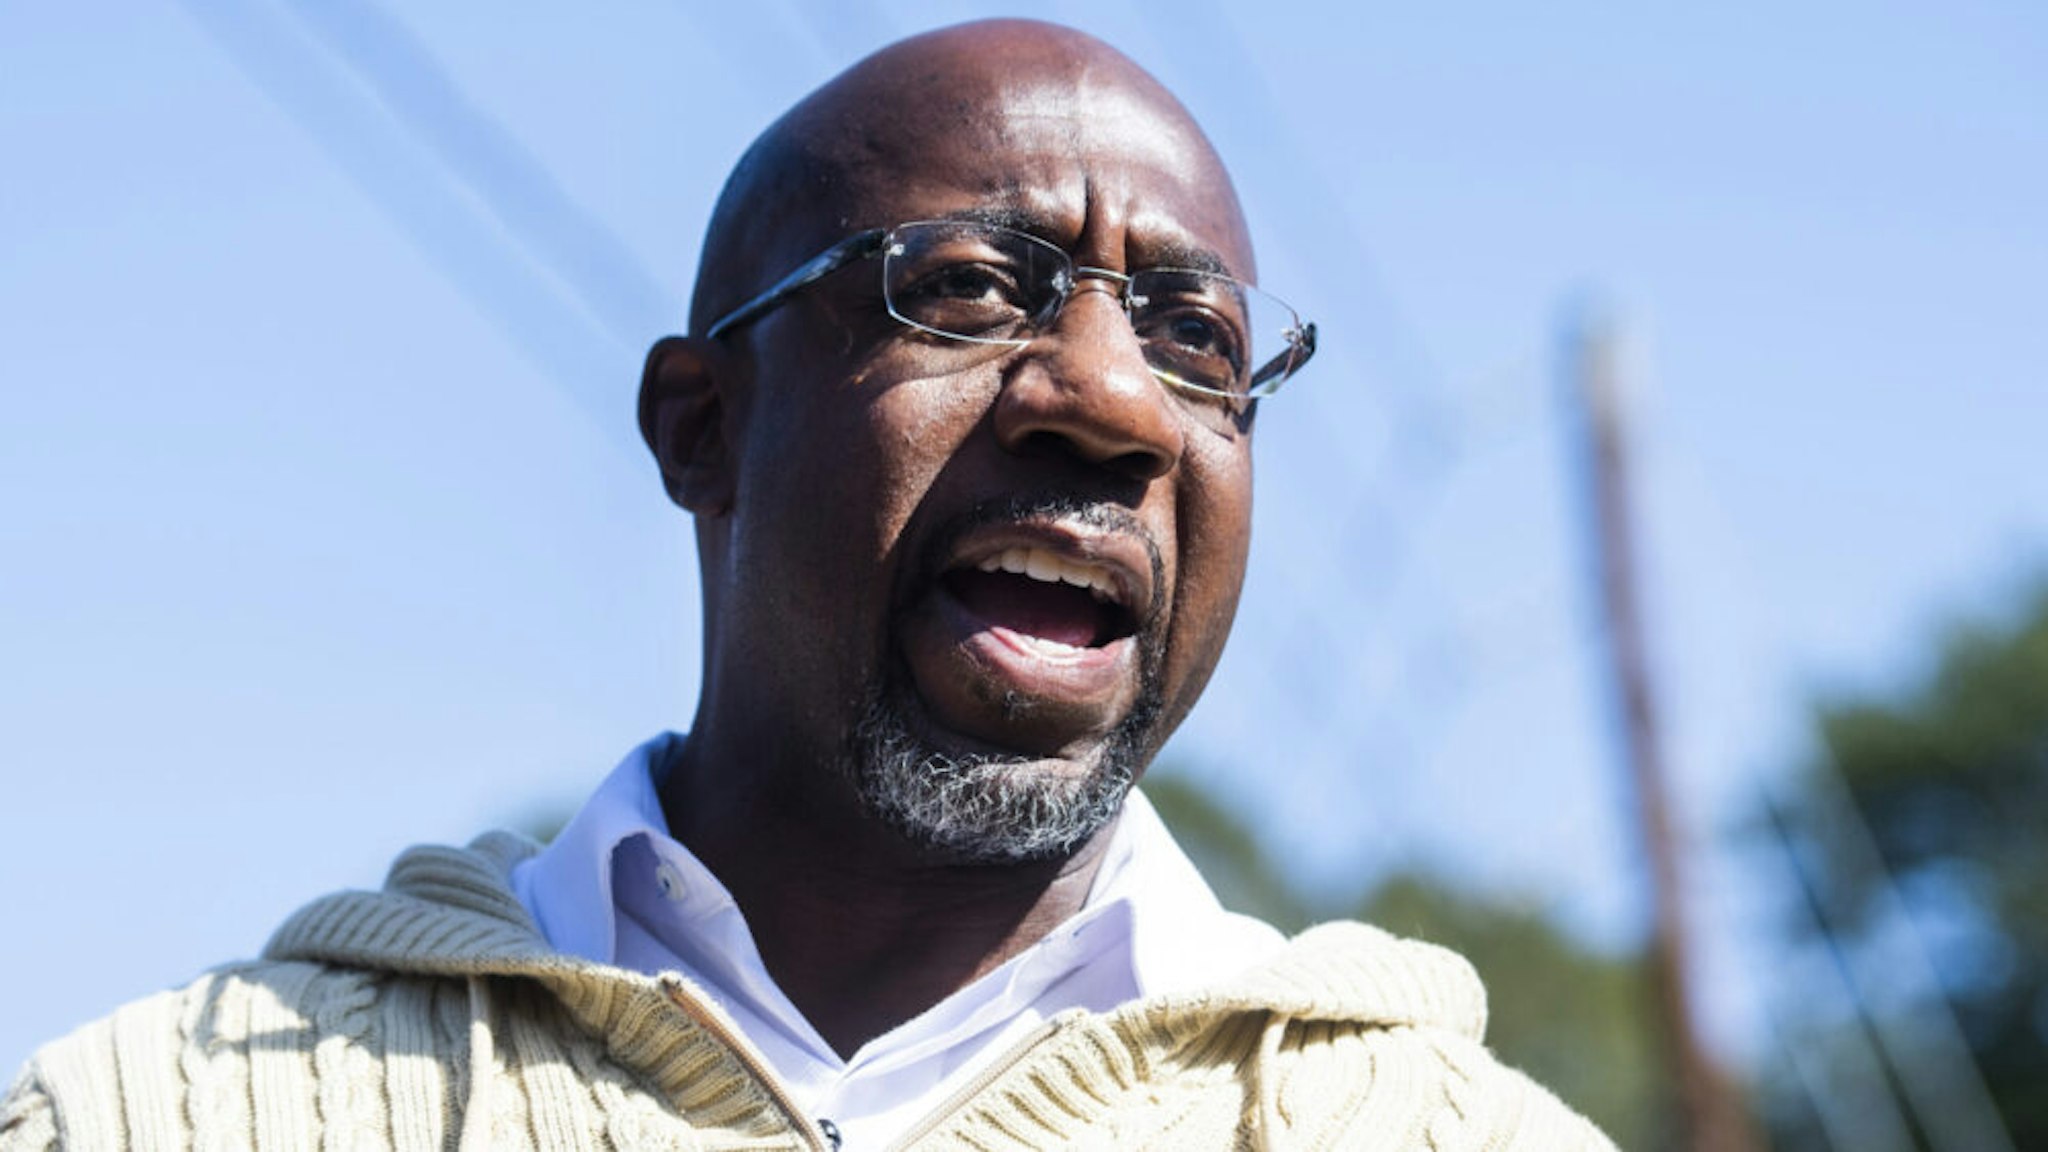 UNITED STATES - NOVEMBER 3: Rev. Raphael Warnock, Democratic candidate for Georgia senate, speaks with supporters during a campaign stop near Coan Park in Atlanta, Ga., on Tuesday, November 3, 2020.